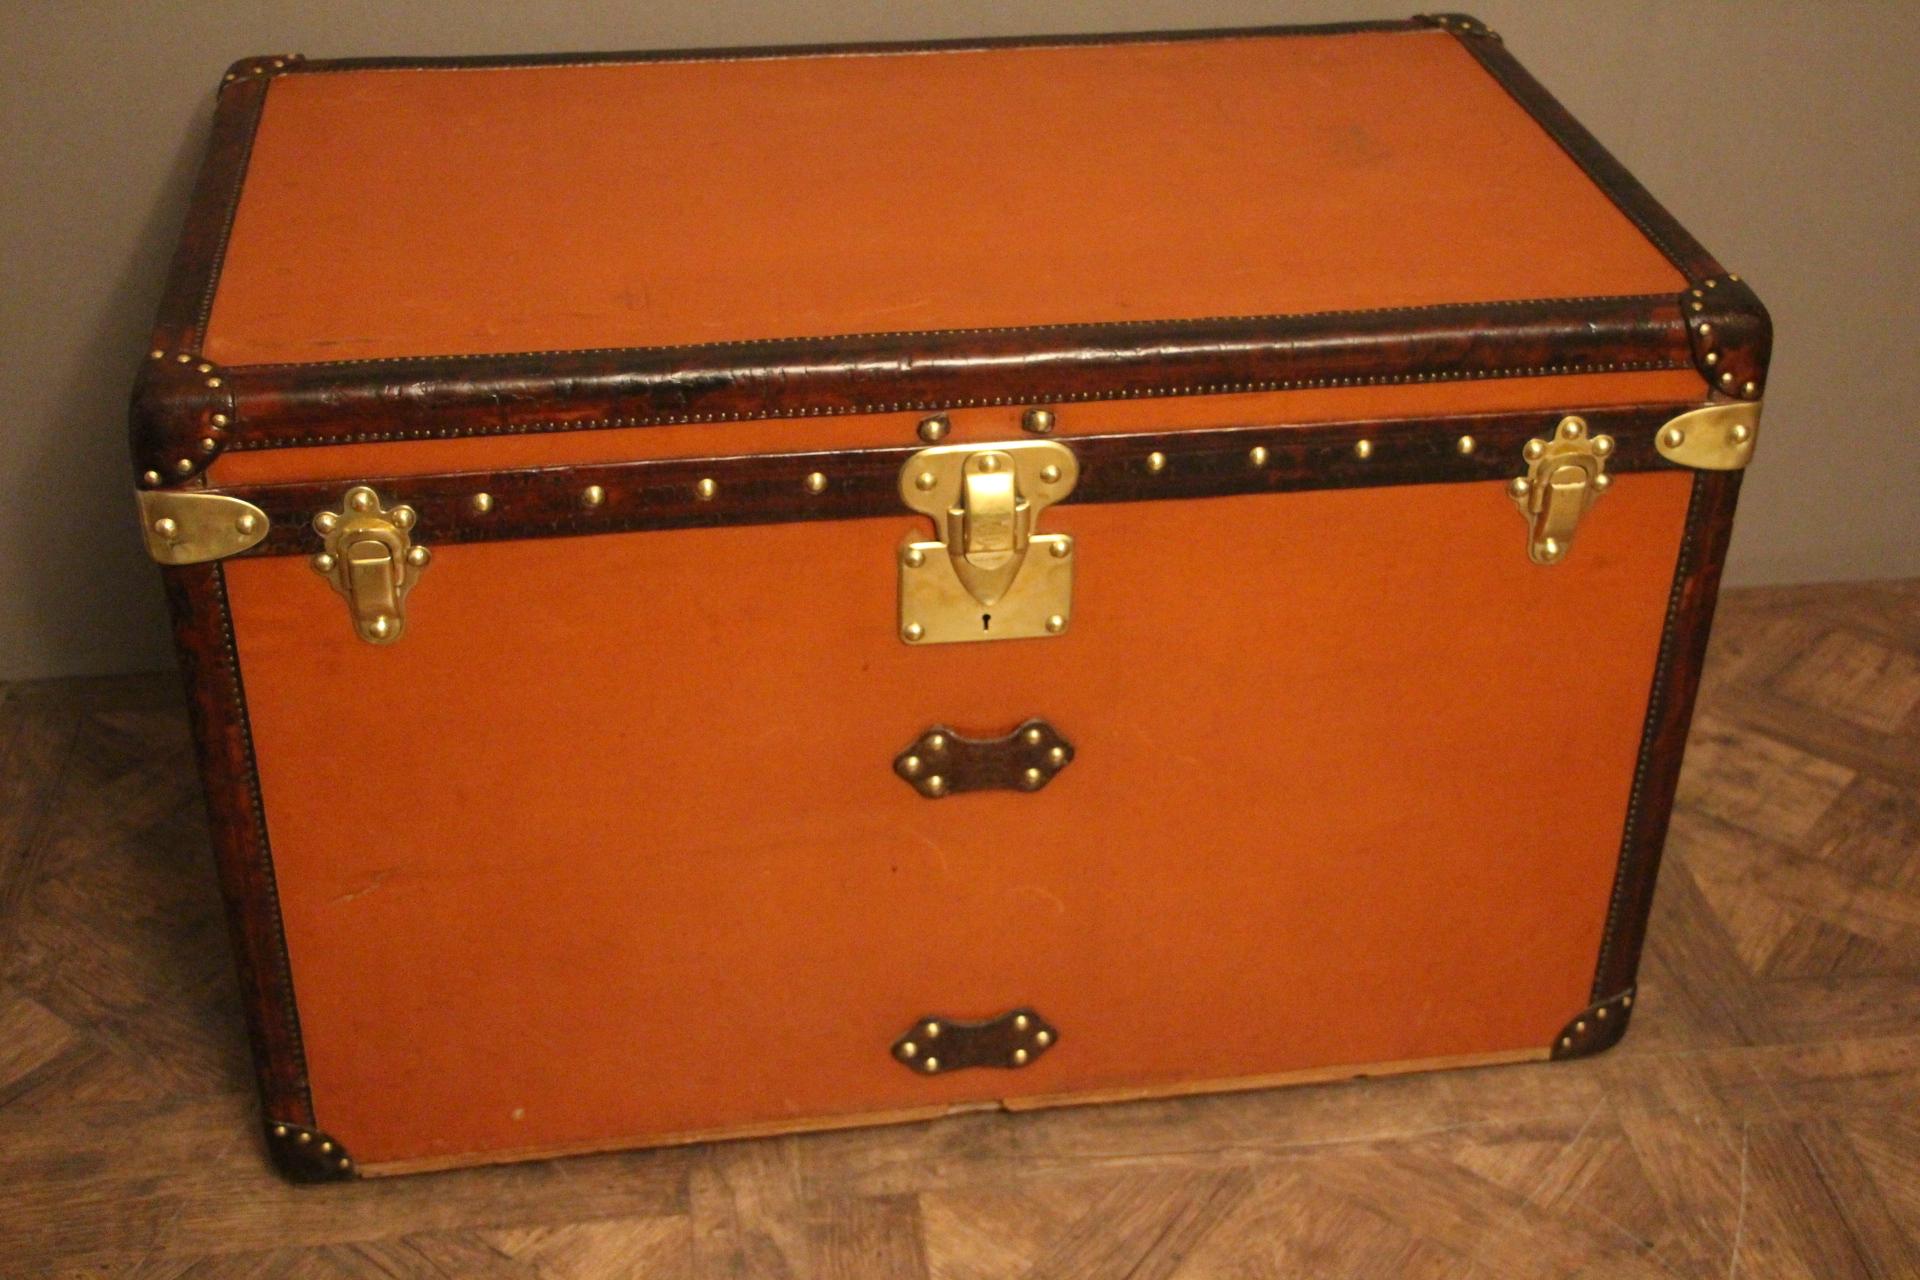 This unusual orange Vuittonite canvas courrier trunk has got all leather trim and handles, all brass stamped LV studs and brass locks. iI has a beautiful original warm orange patina.
Its interior is all original too with beige linen, removable